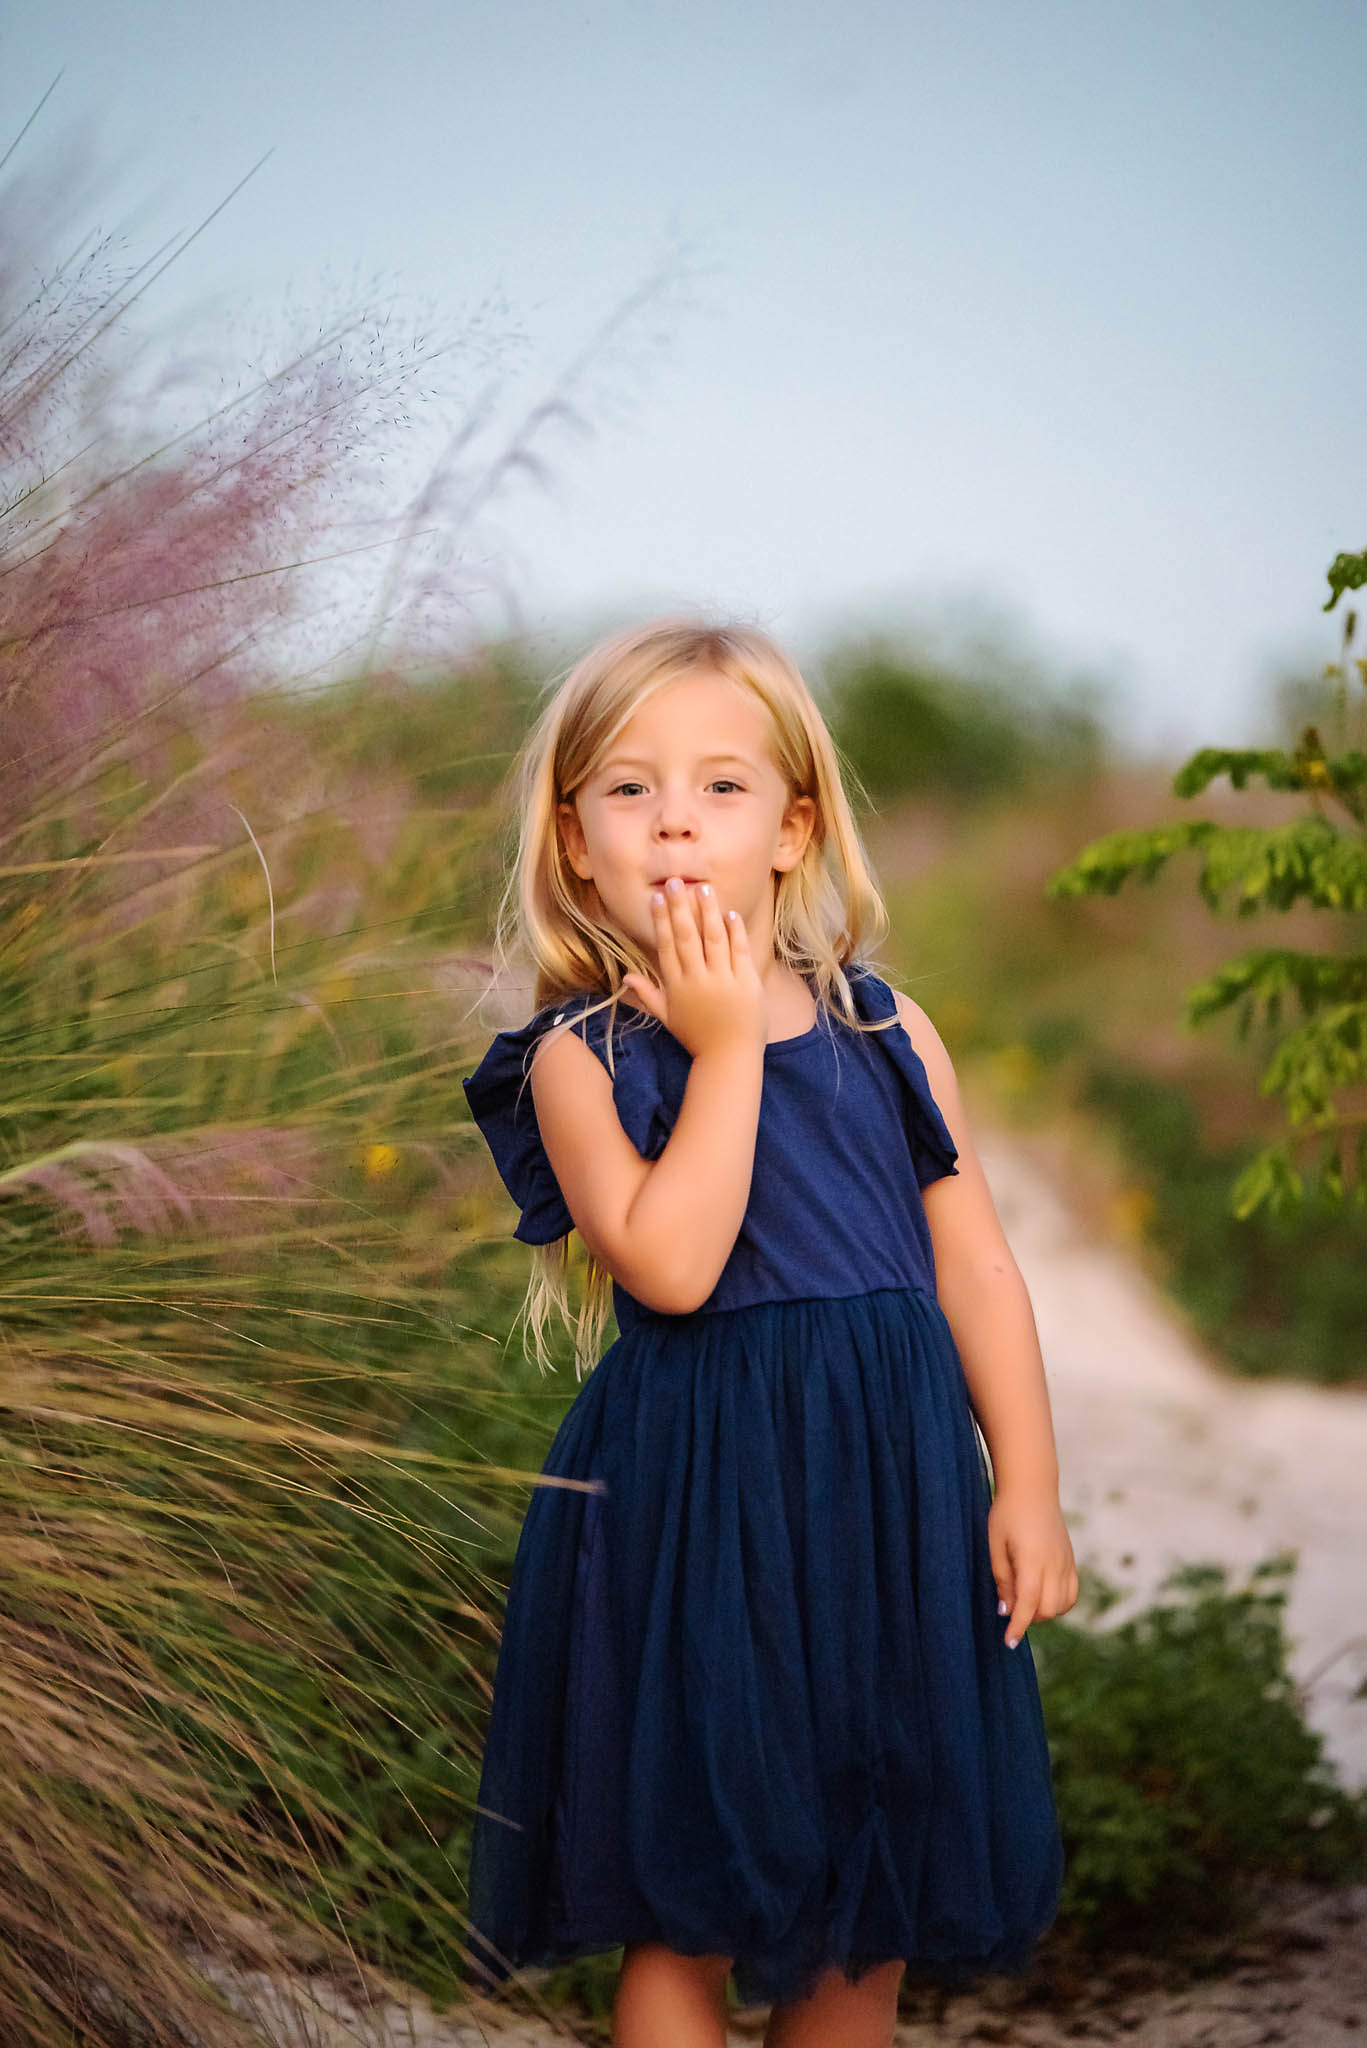 LIttle girl in blue dress blows a kiss towards the camera